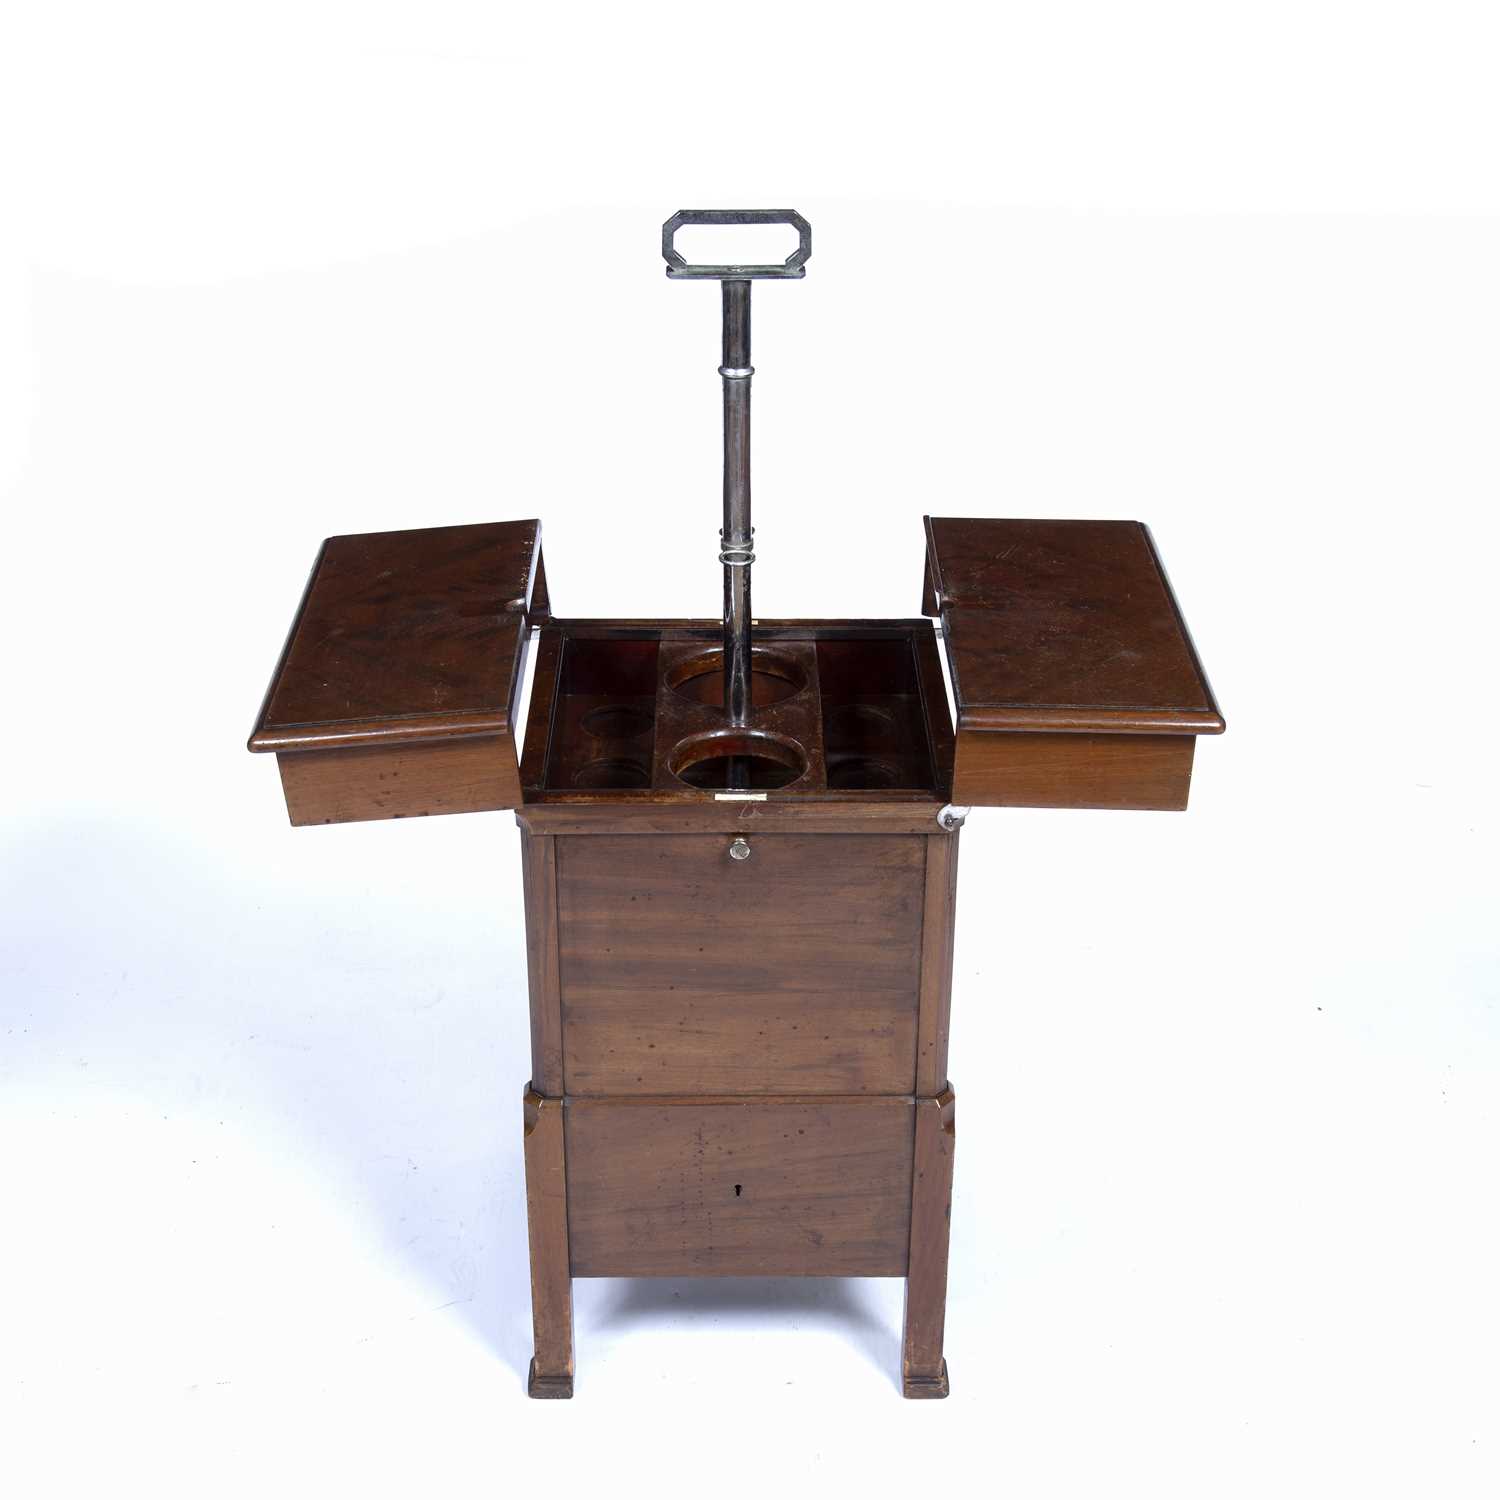 Asprey mahogany 'Elevette' rising drinks table 20th Century, with a central rising tantalus to the - Image 5 of 8